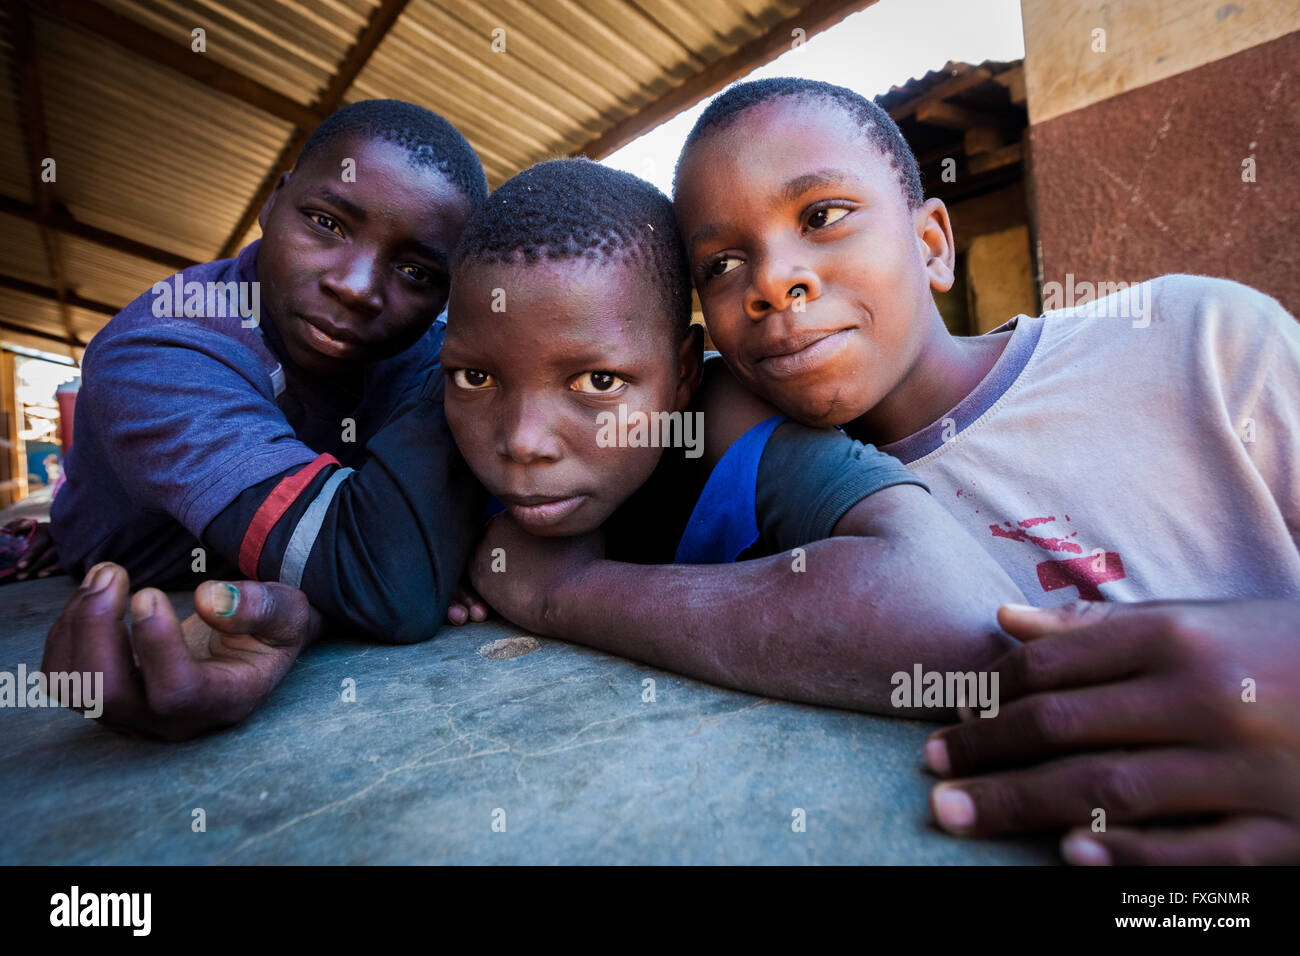 Mozambique,Africa, poor boys in fruit market Stock Photo - Alamy